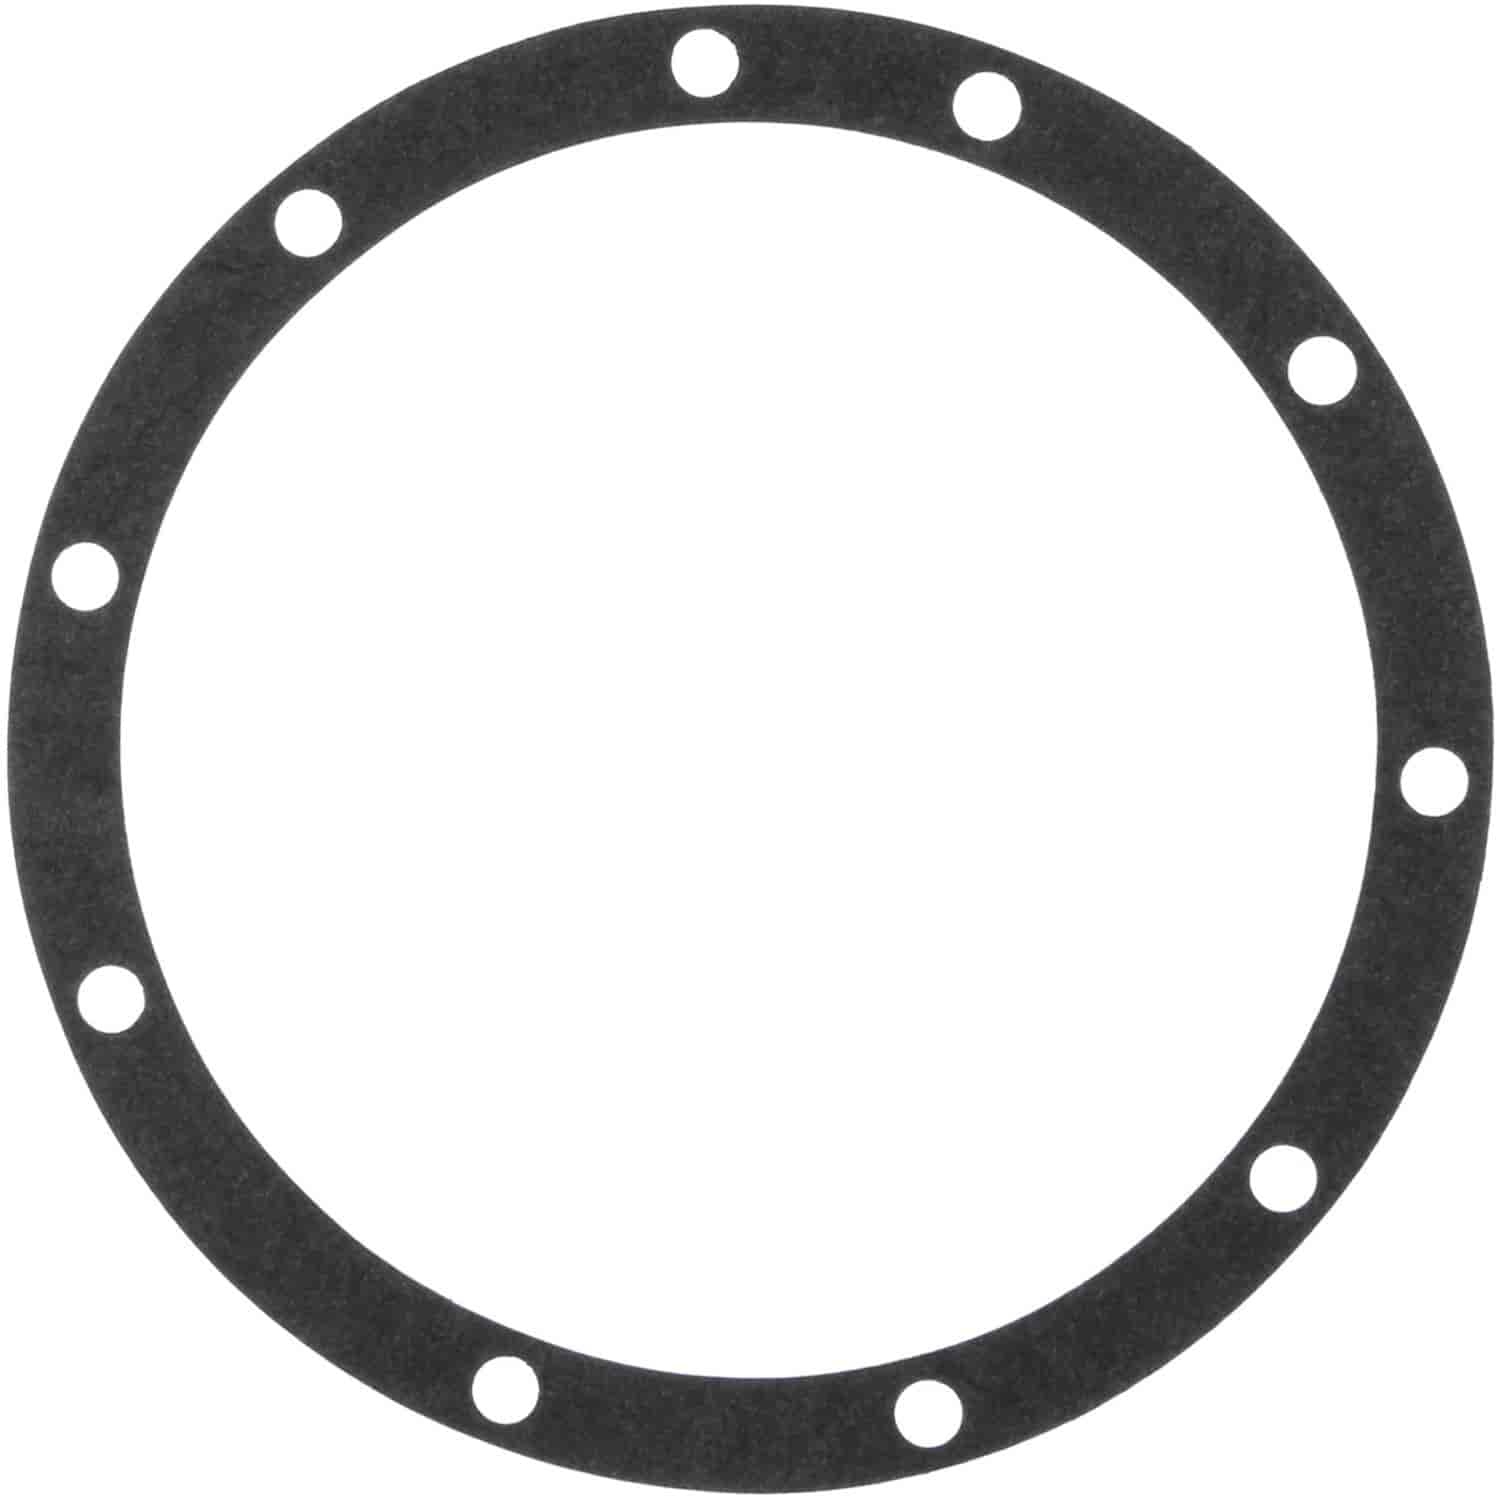 Differential Carrier Gasket 1955-1978 Chrysler/Dodge/Plymouth with 8.75" Chrysler